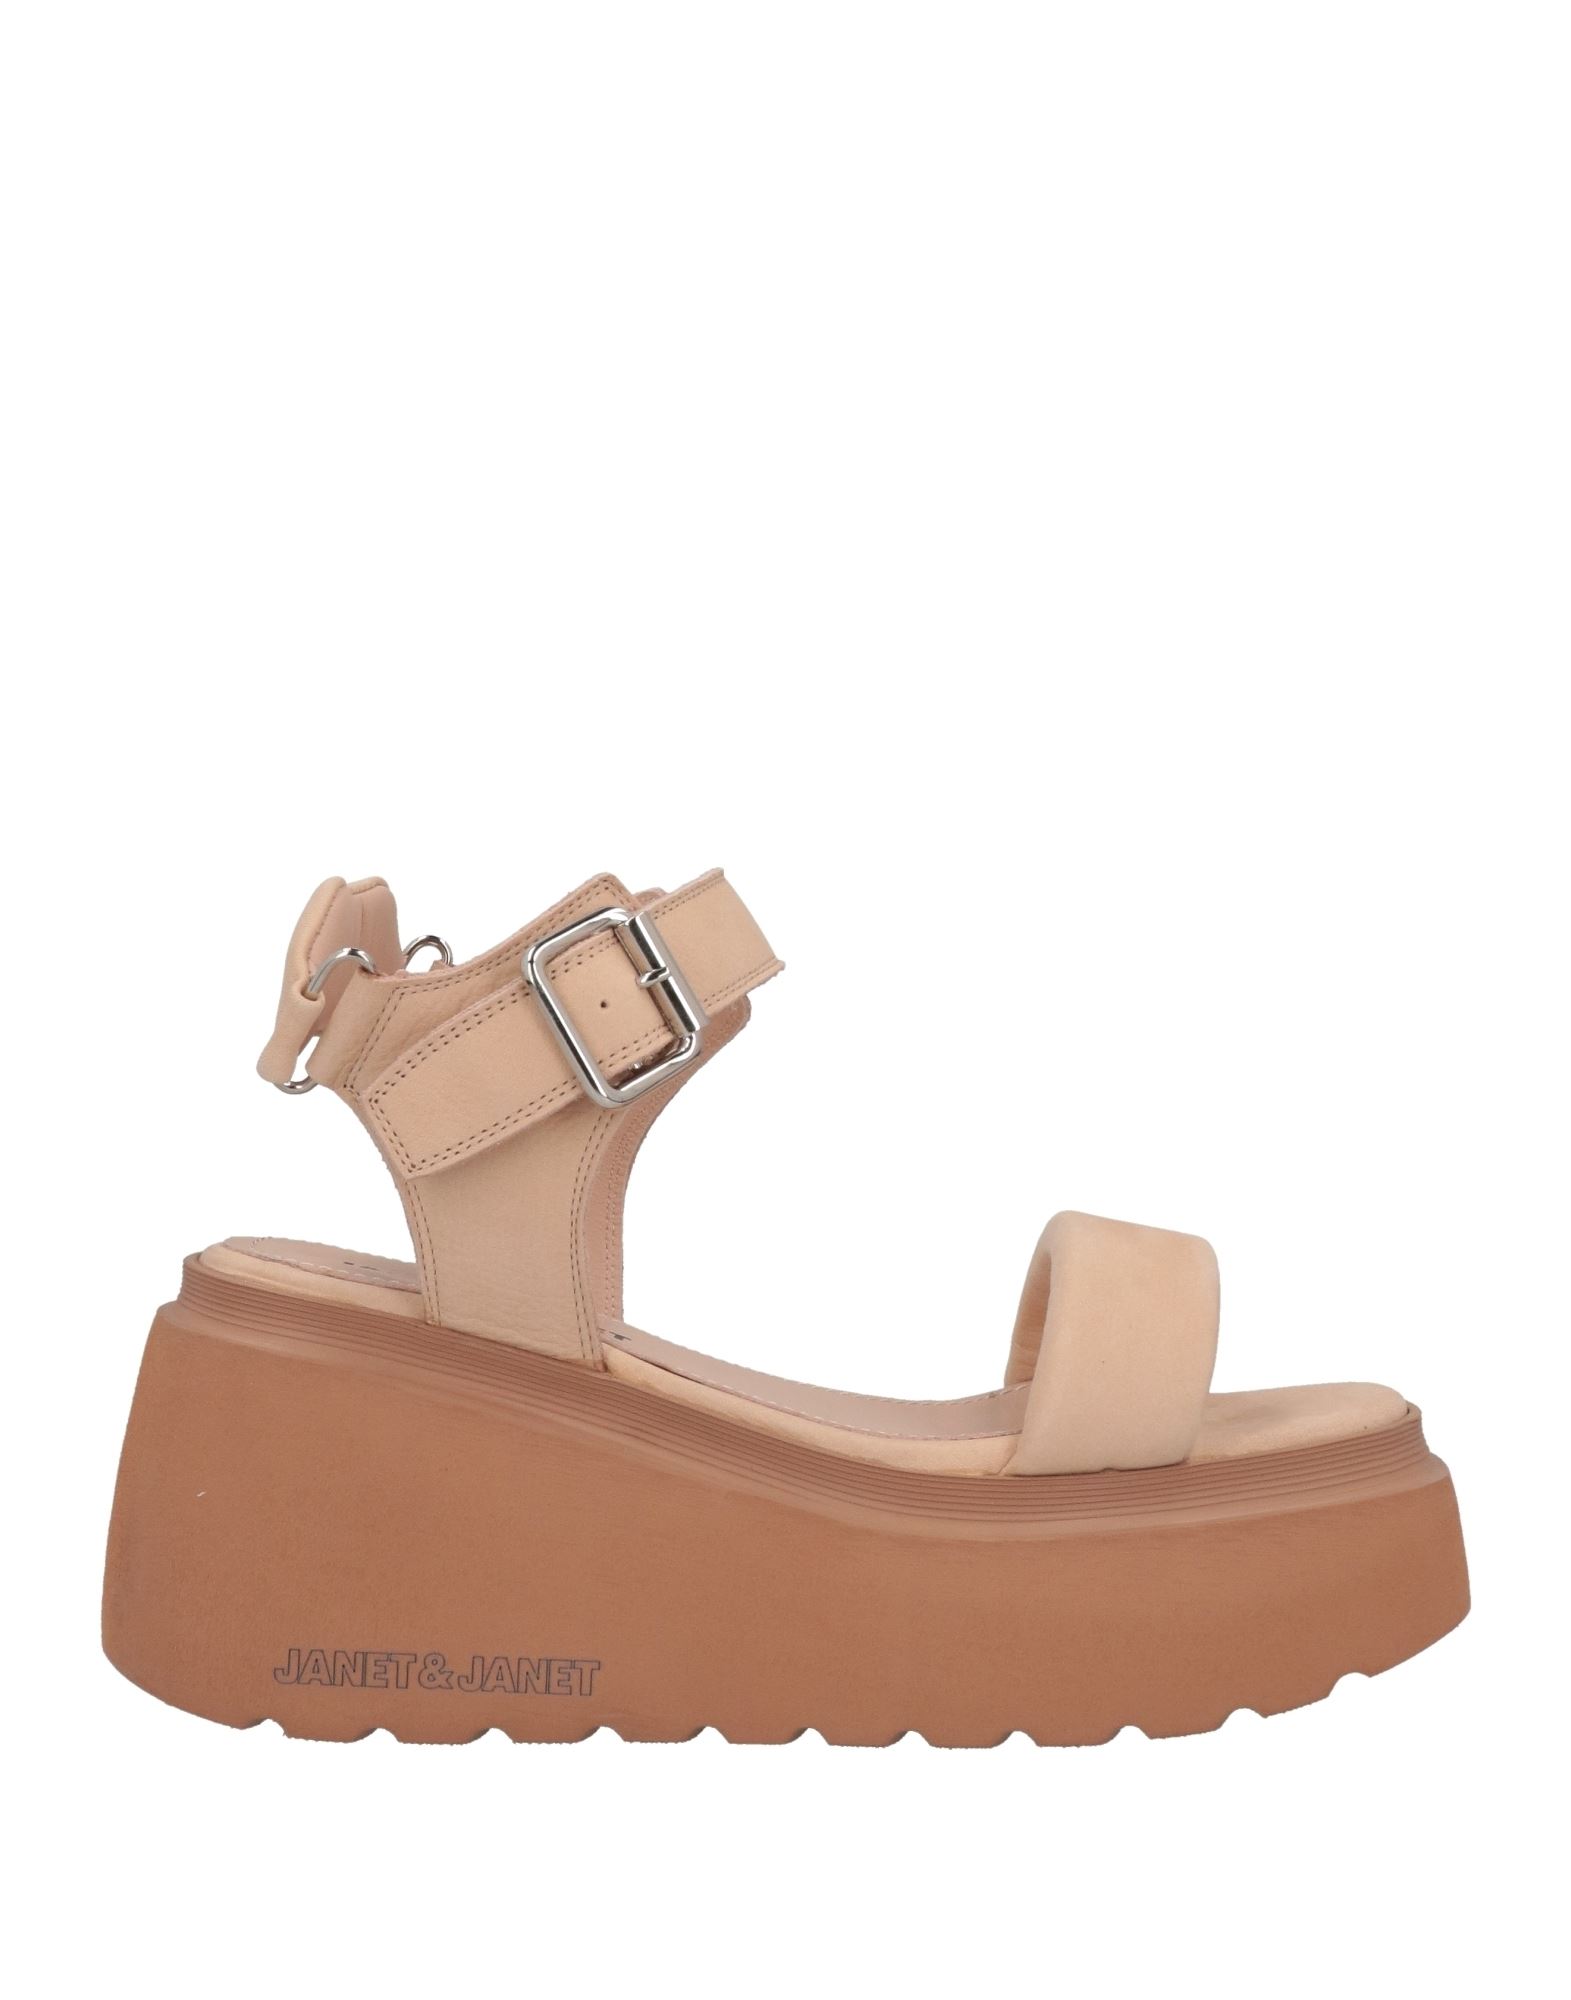 Janet & Janet Woman Sandals Beige Size 10 Leather